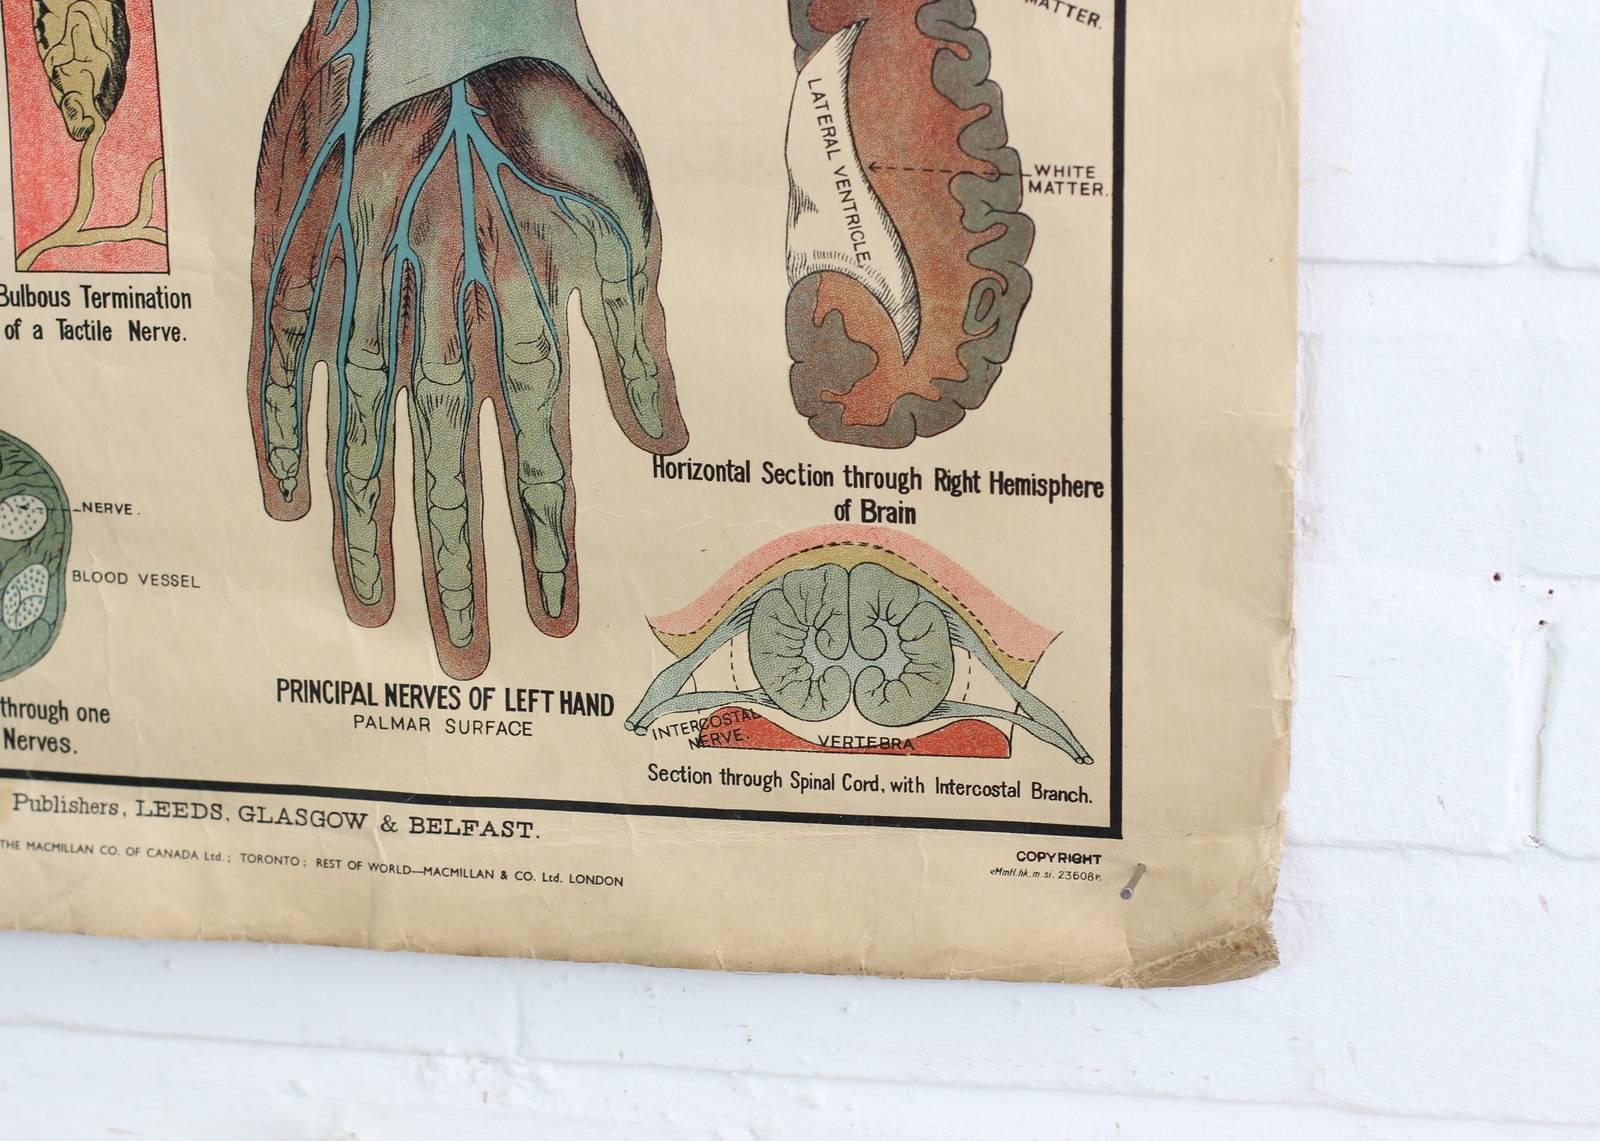 English Anatomical Chart of the Nervous System by Robert E Holding circa 1910